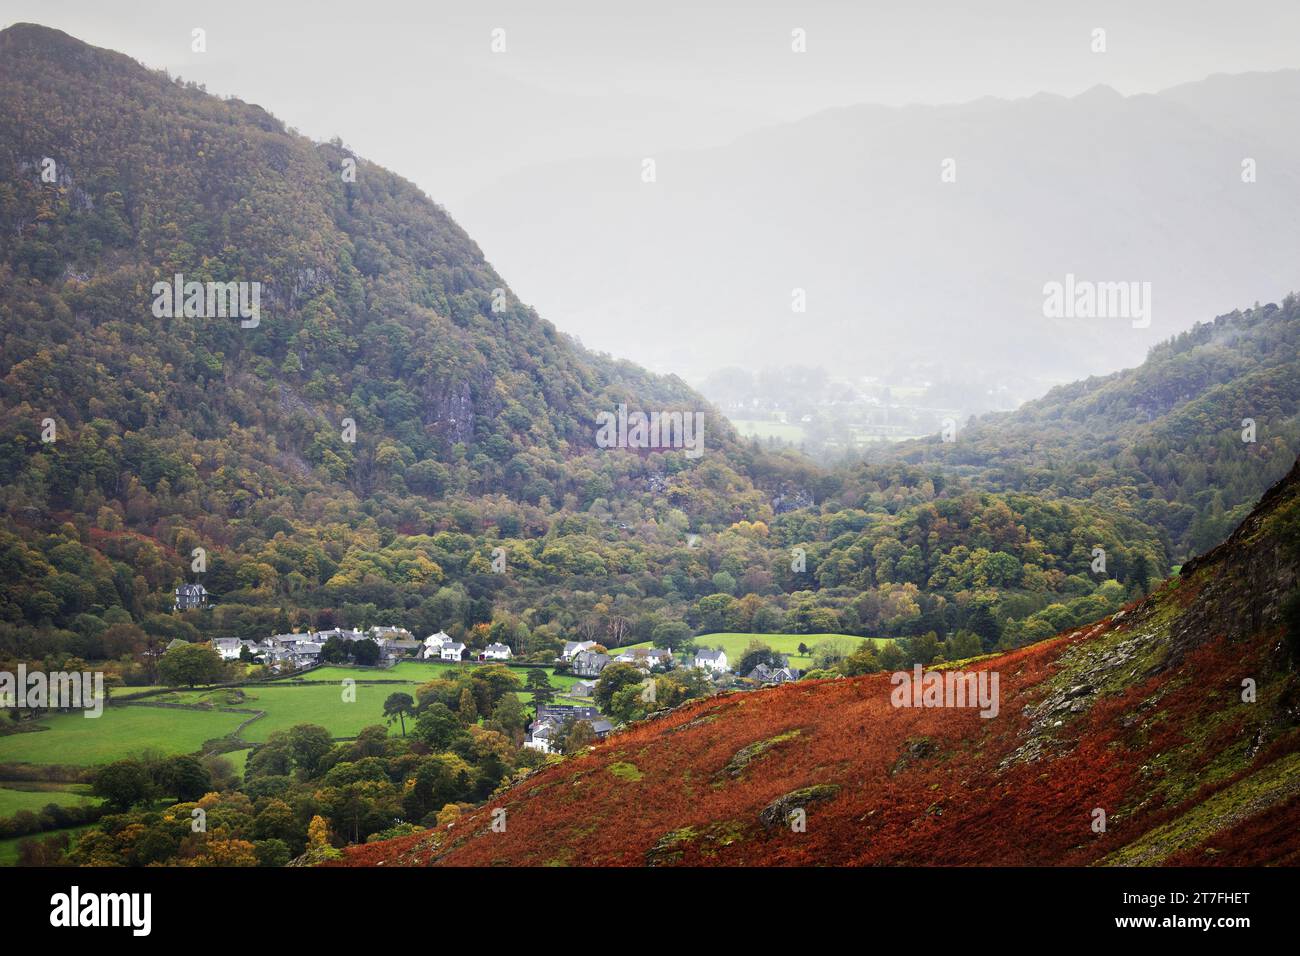 Landscape images in the Lake District Stock Photo